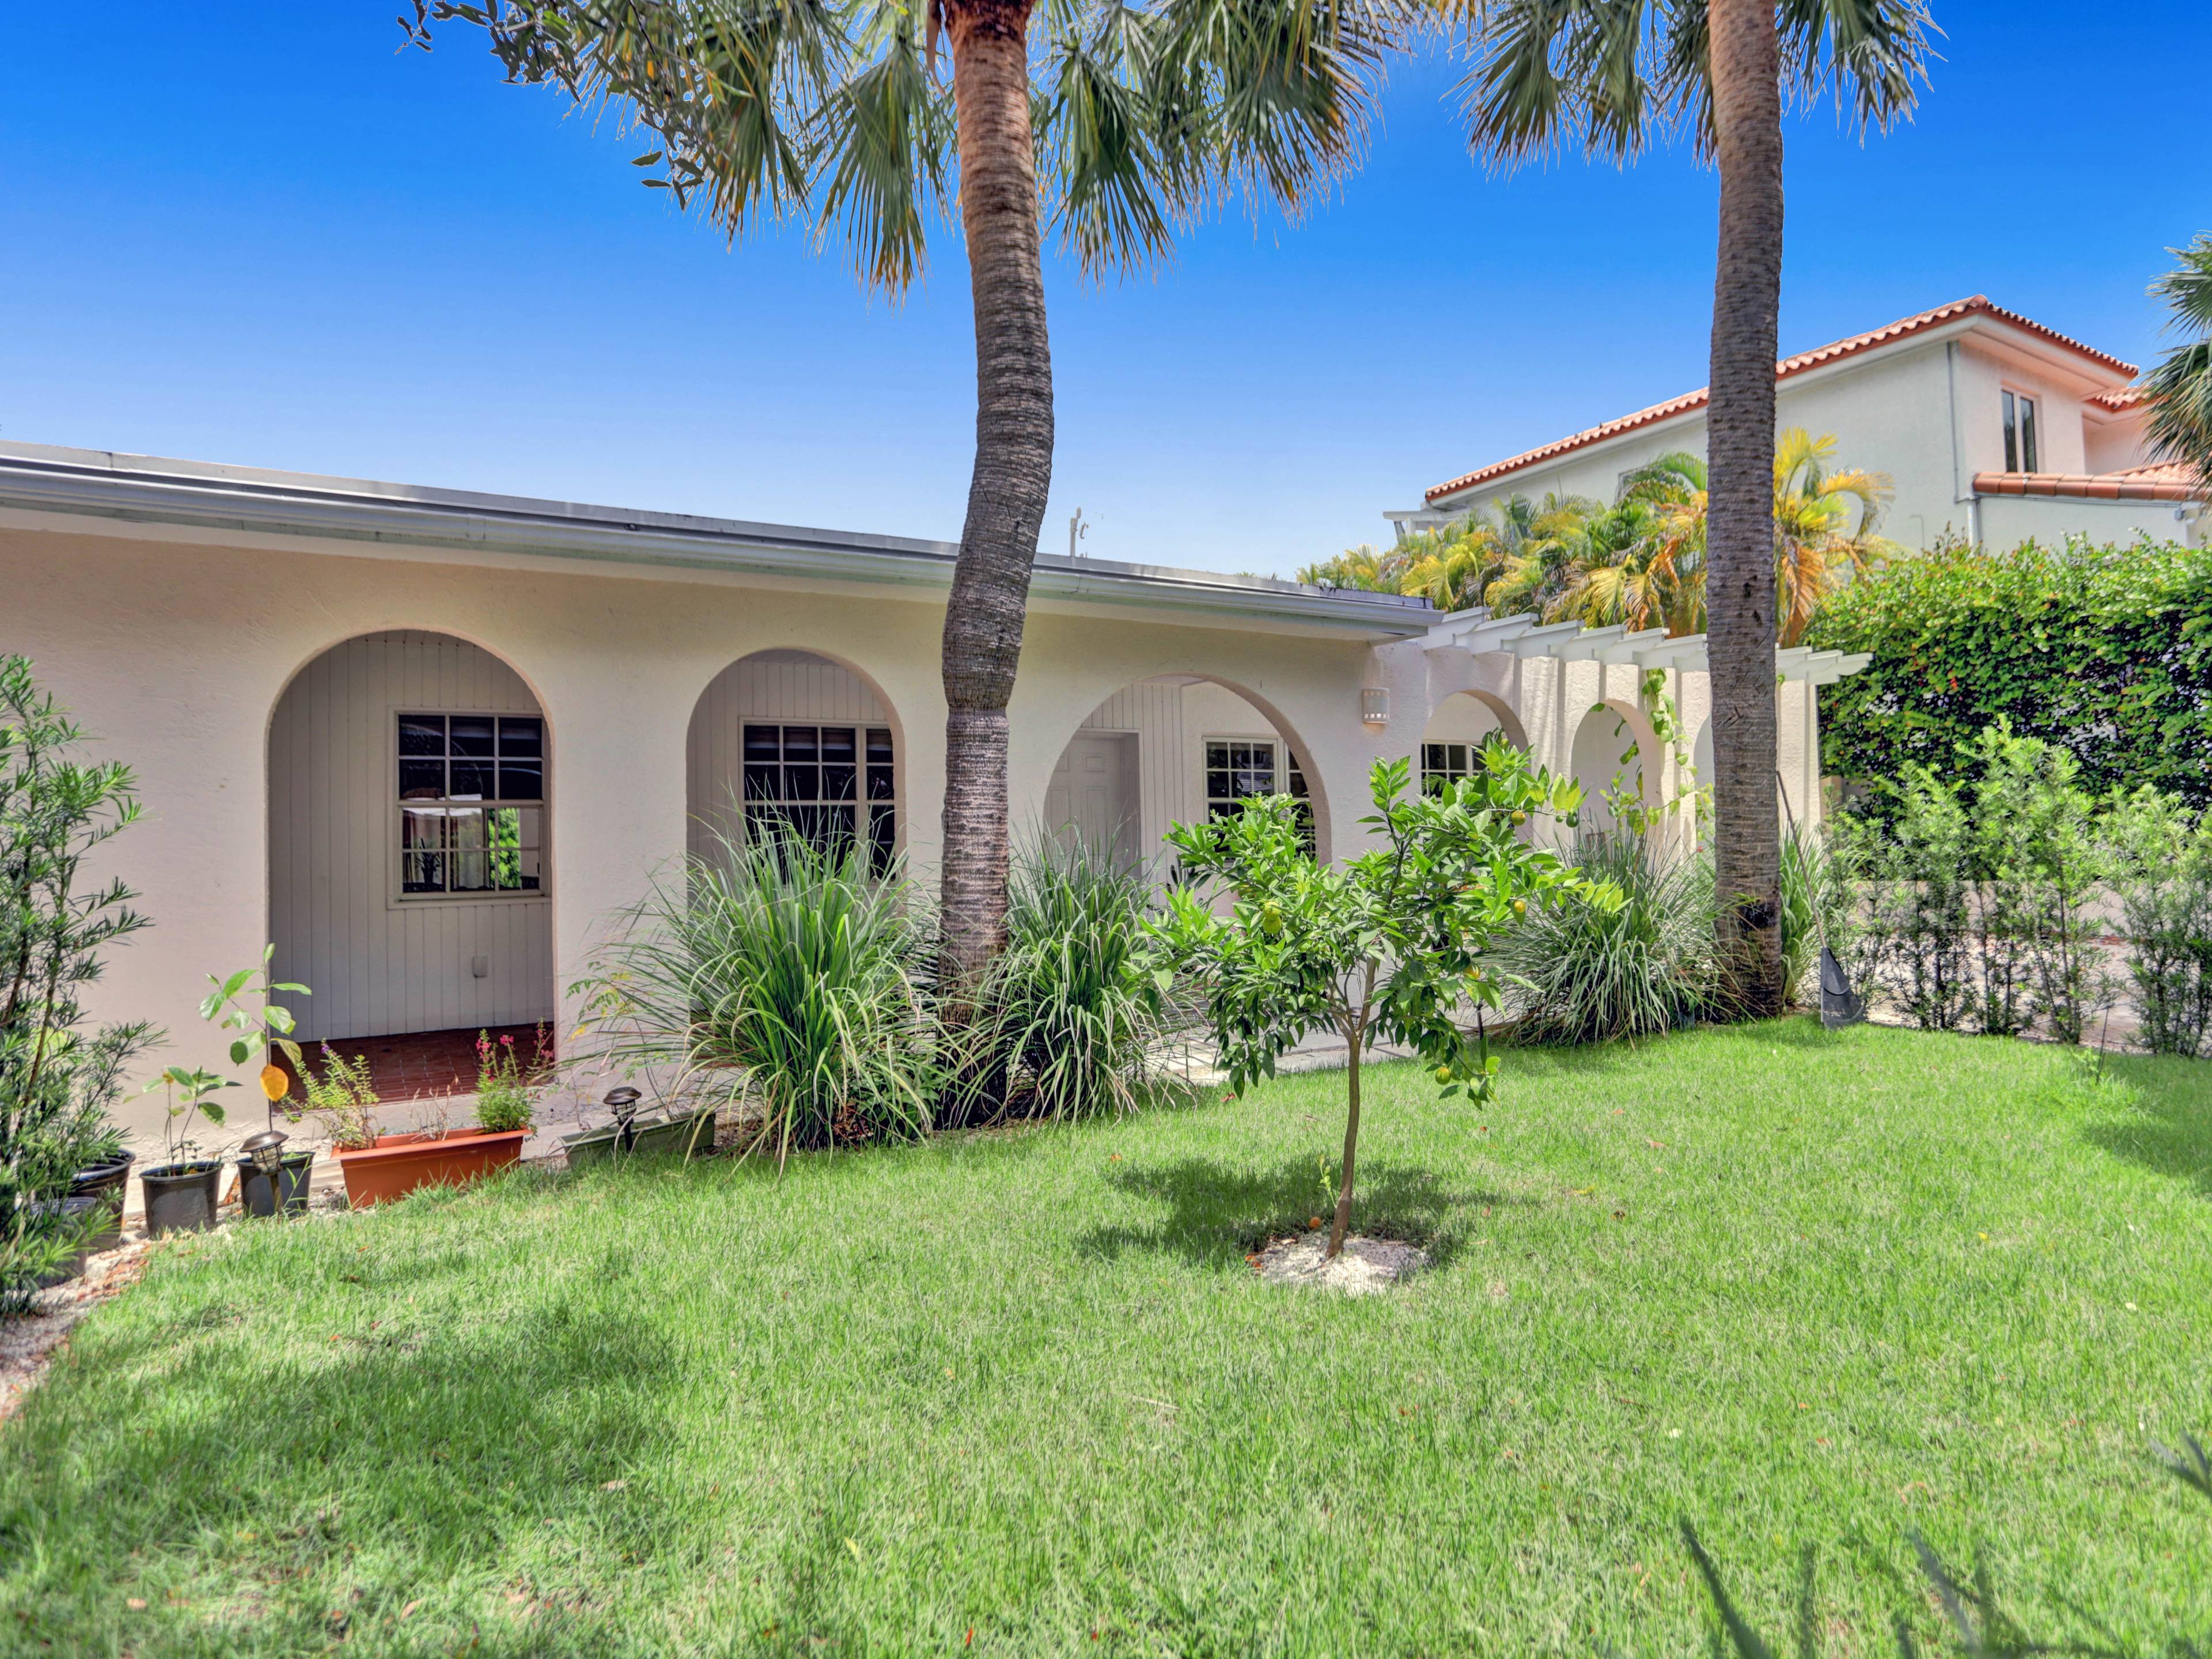 Miami Single Family Home w/ Pool | Key Biscayne | Public Golf Community | 3 bed 3 Bath + Office | Rental Income Property